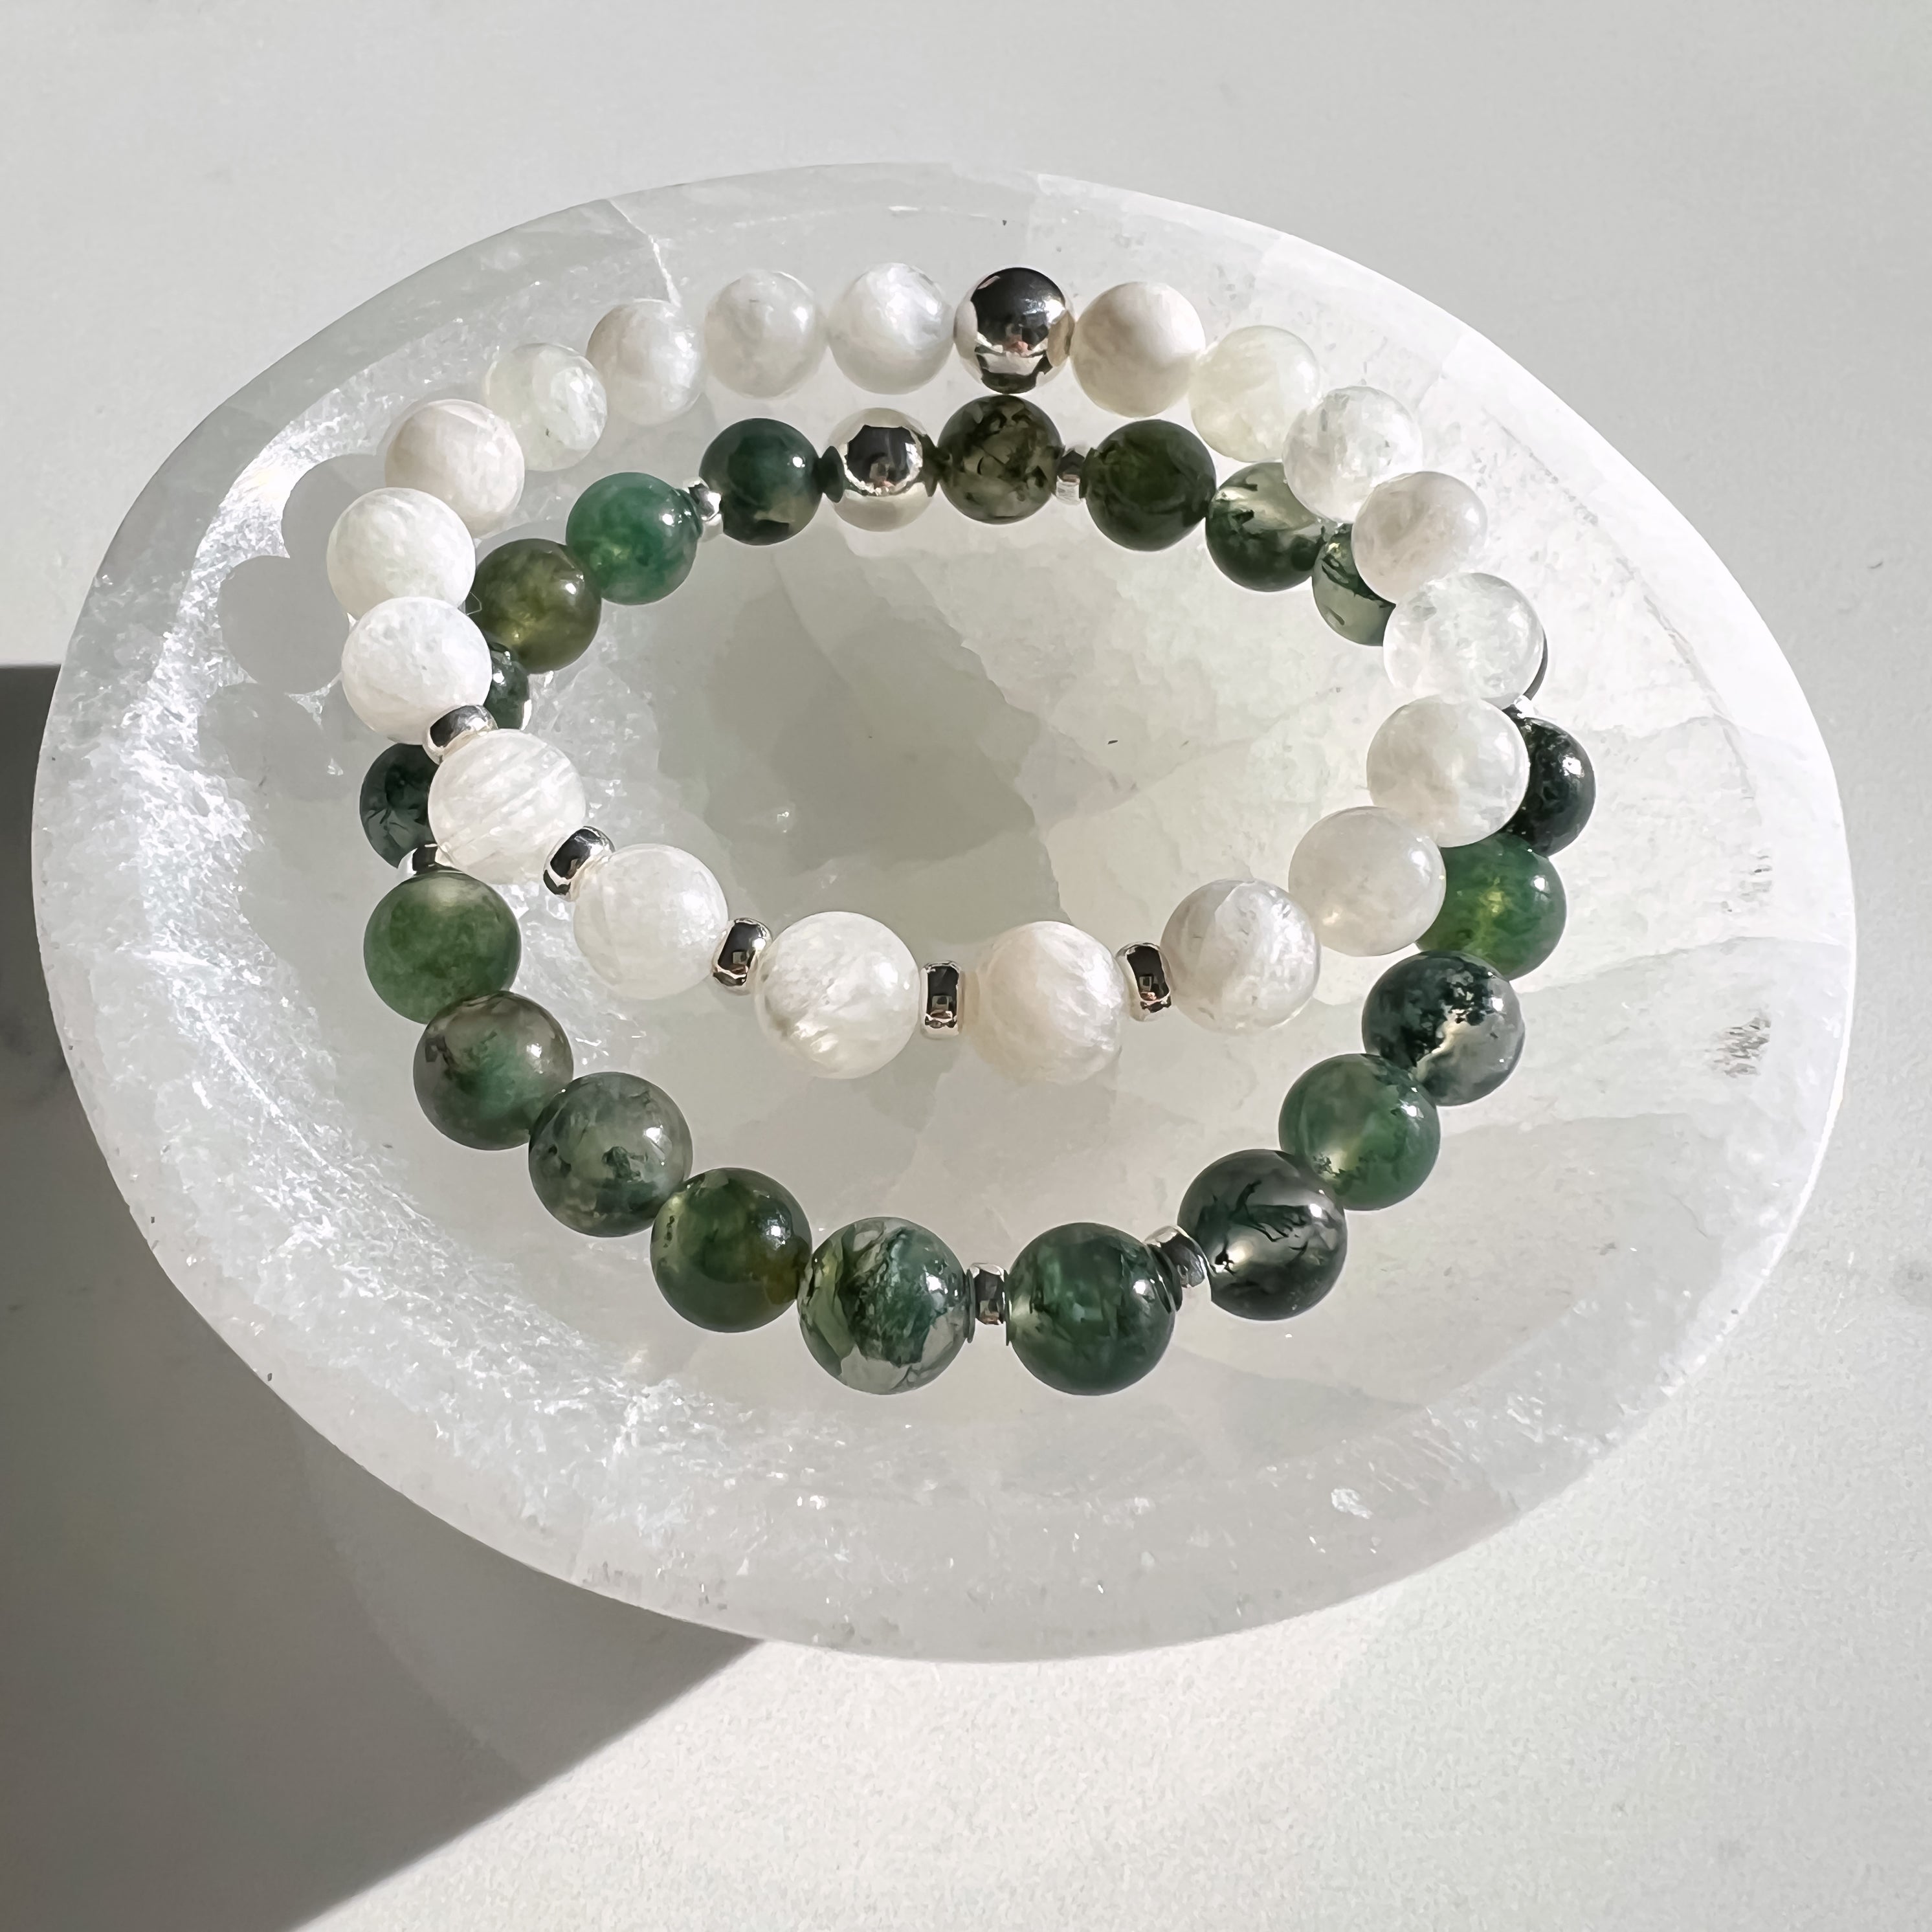 A selenite bowl with crystal bracelets in it